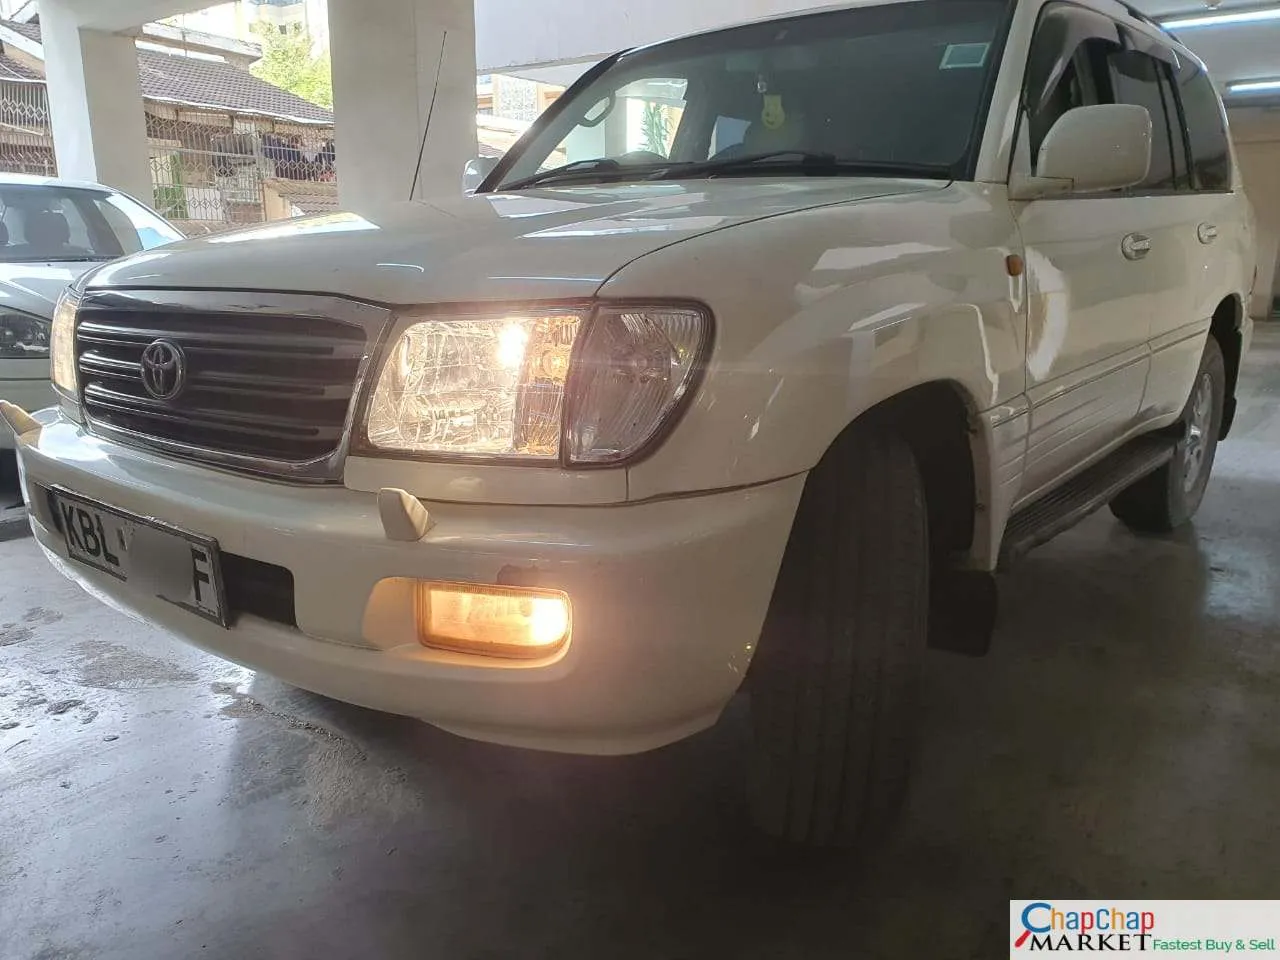 Cars Cars For Sale/Vehicles-Toyota Landcruiser VX V8 ASIAN OWNER 00 SERIES You Pay 30% Deposit Trade in Ok 7